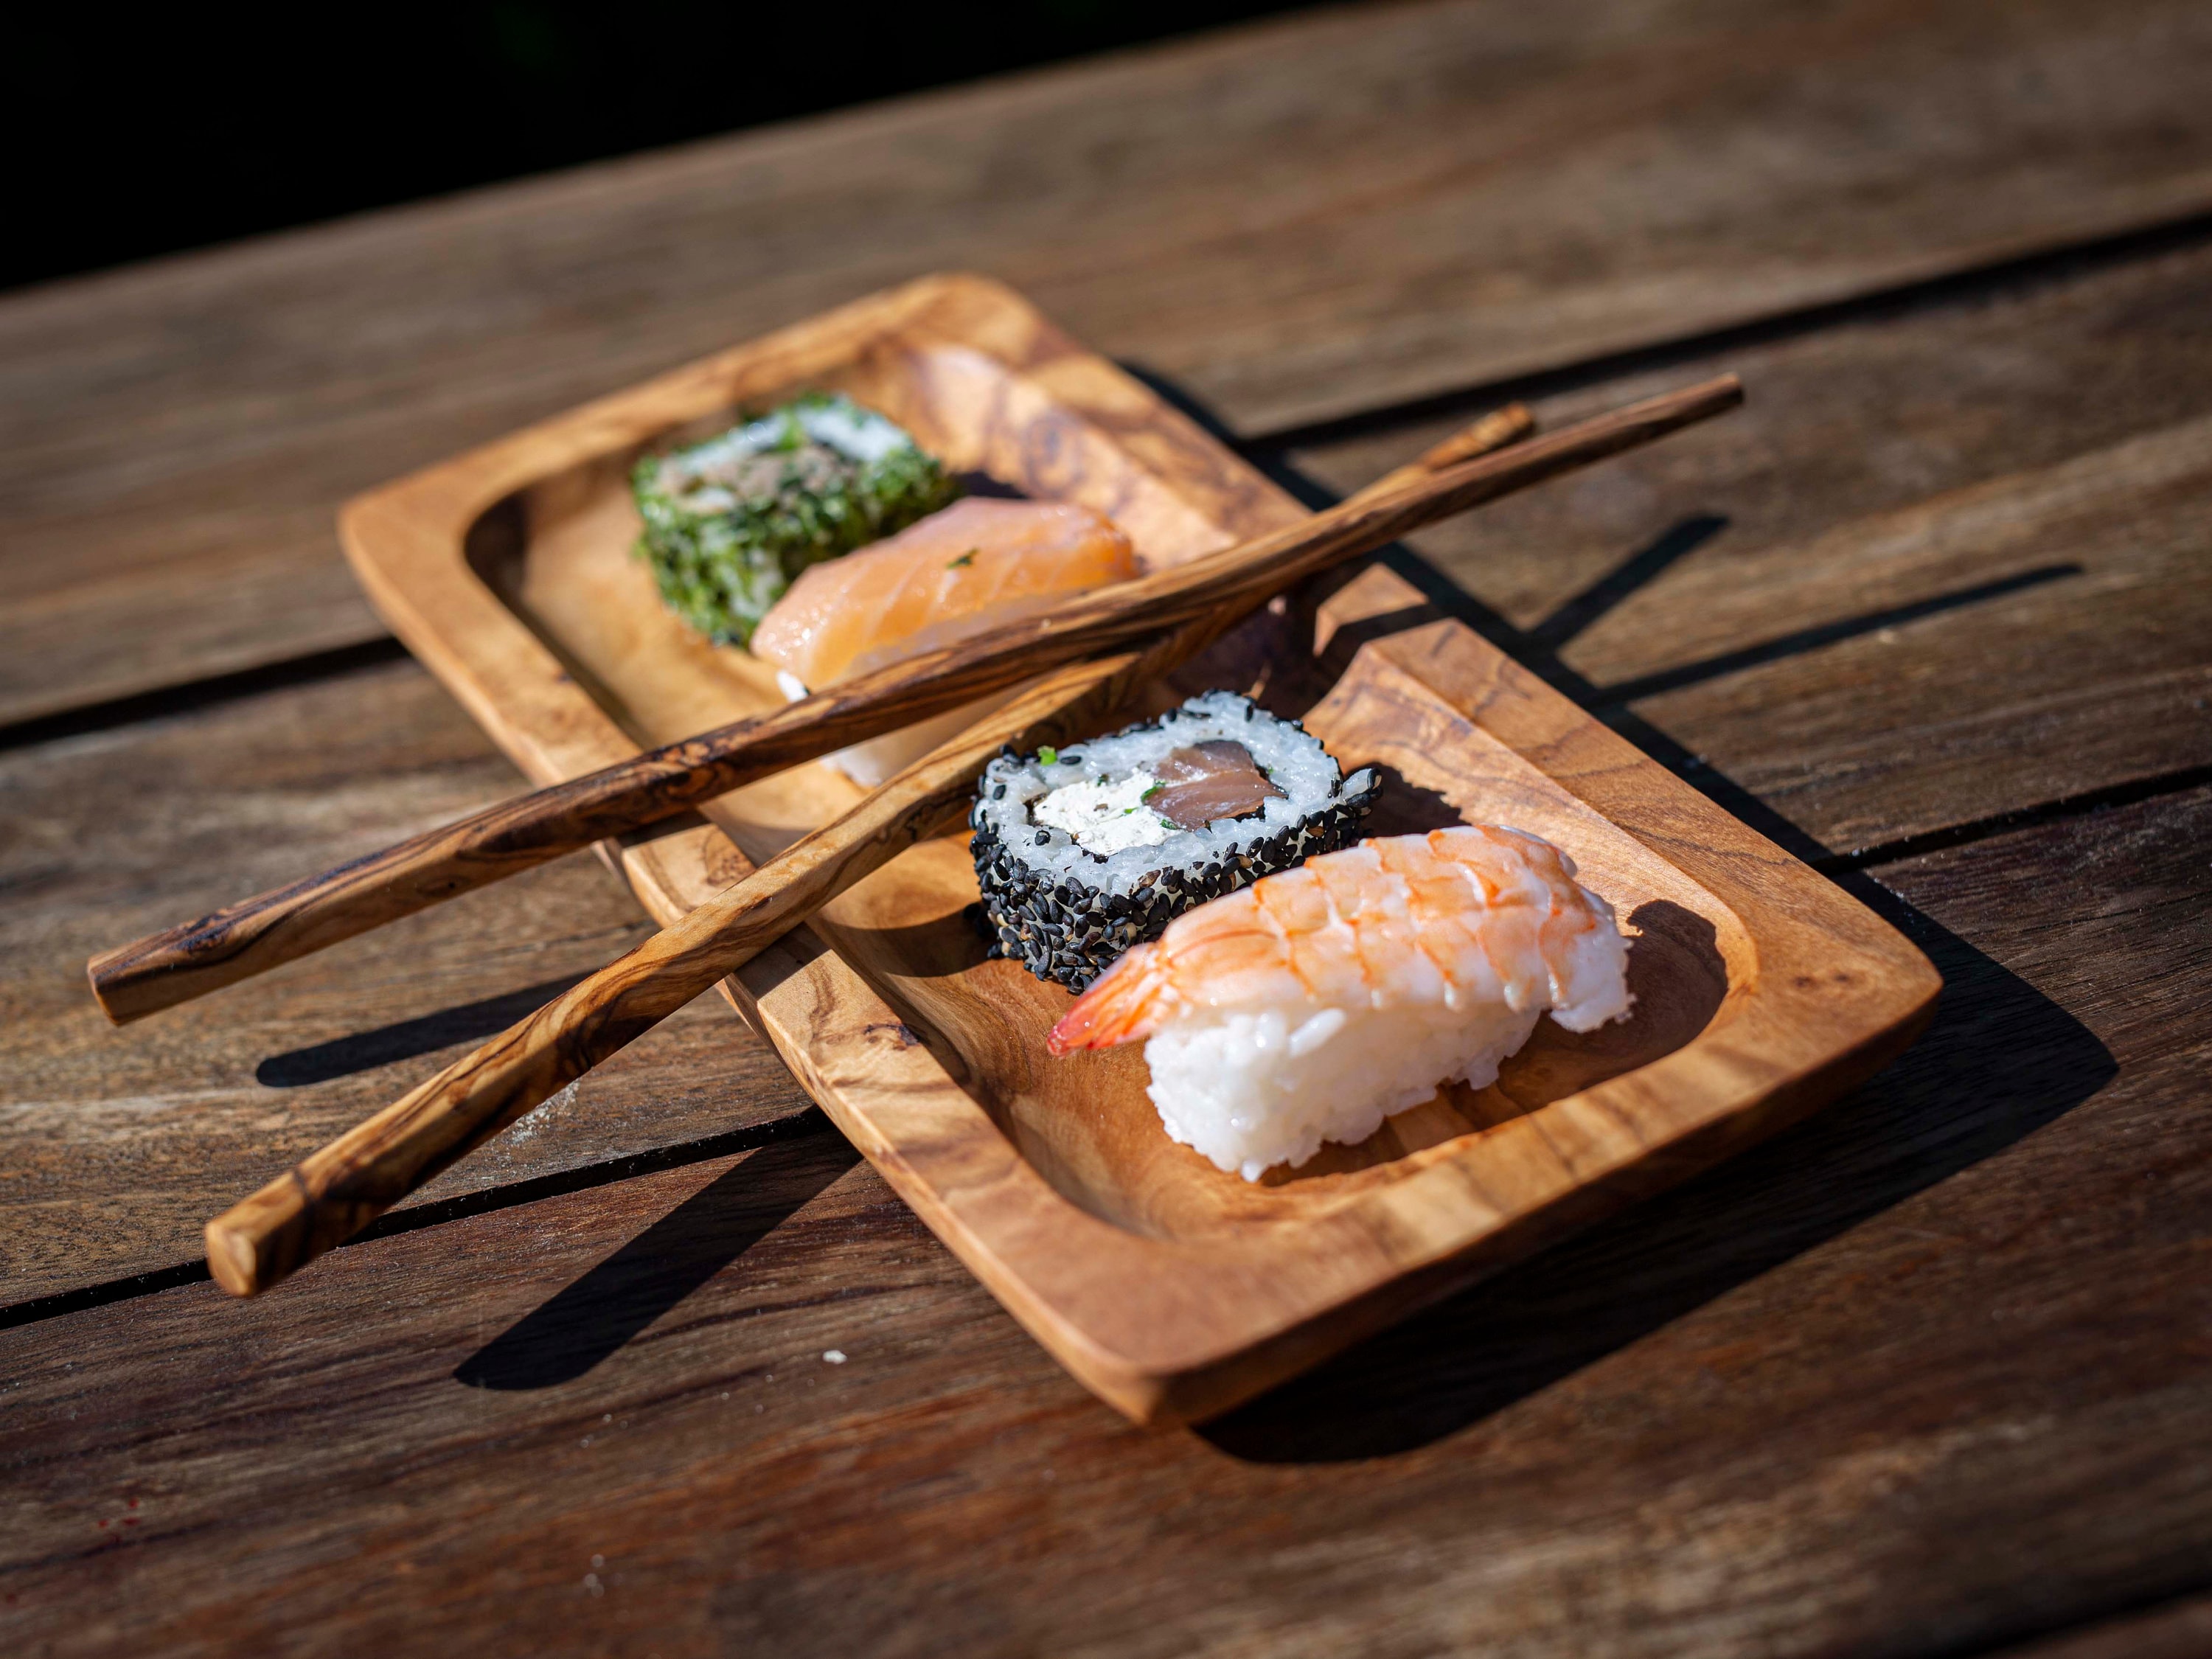 Custom Handcrafted Sushi Board, Serving Tray with Chop Stix